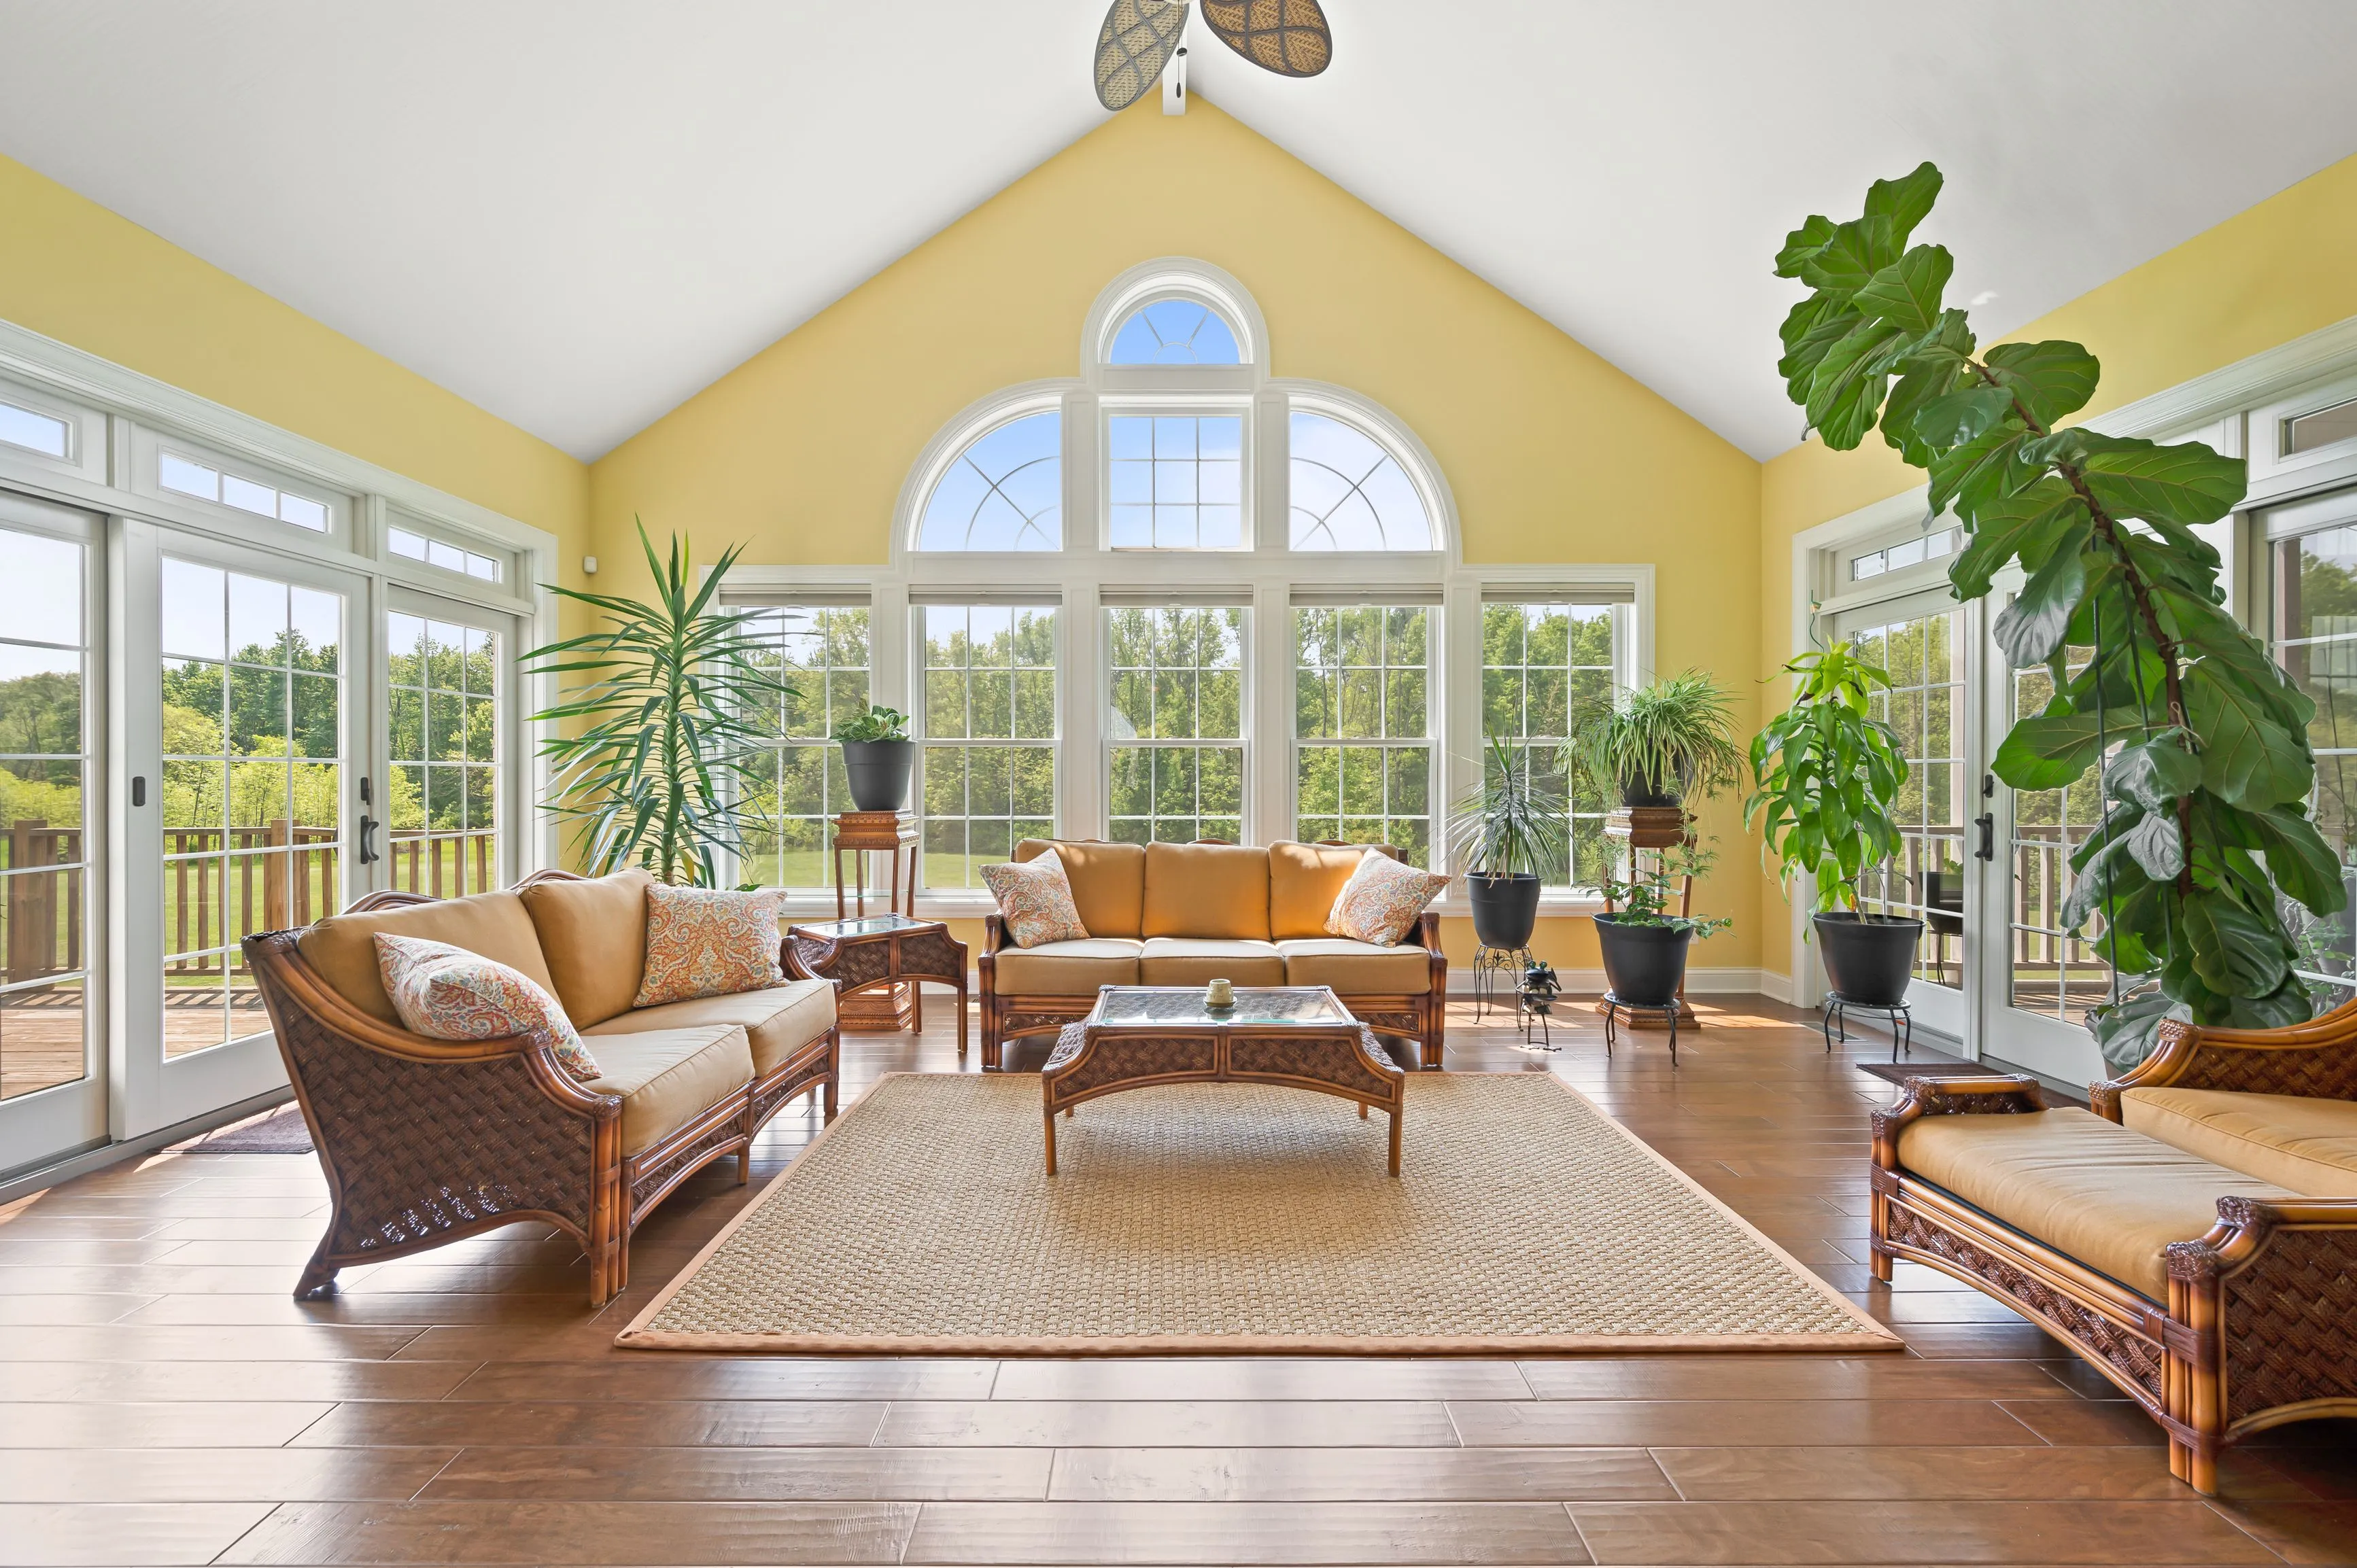 Bright and airy sunroom with large windows, wicker furniture, and indoor plants.